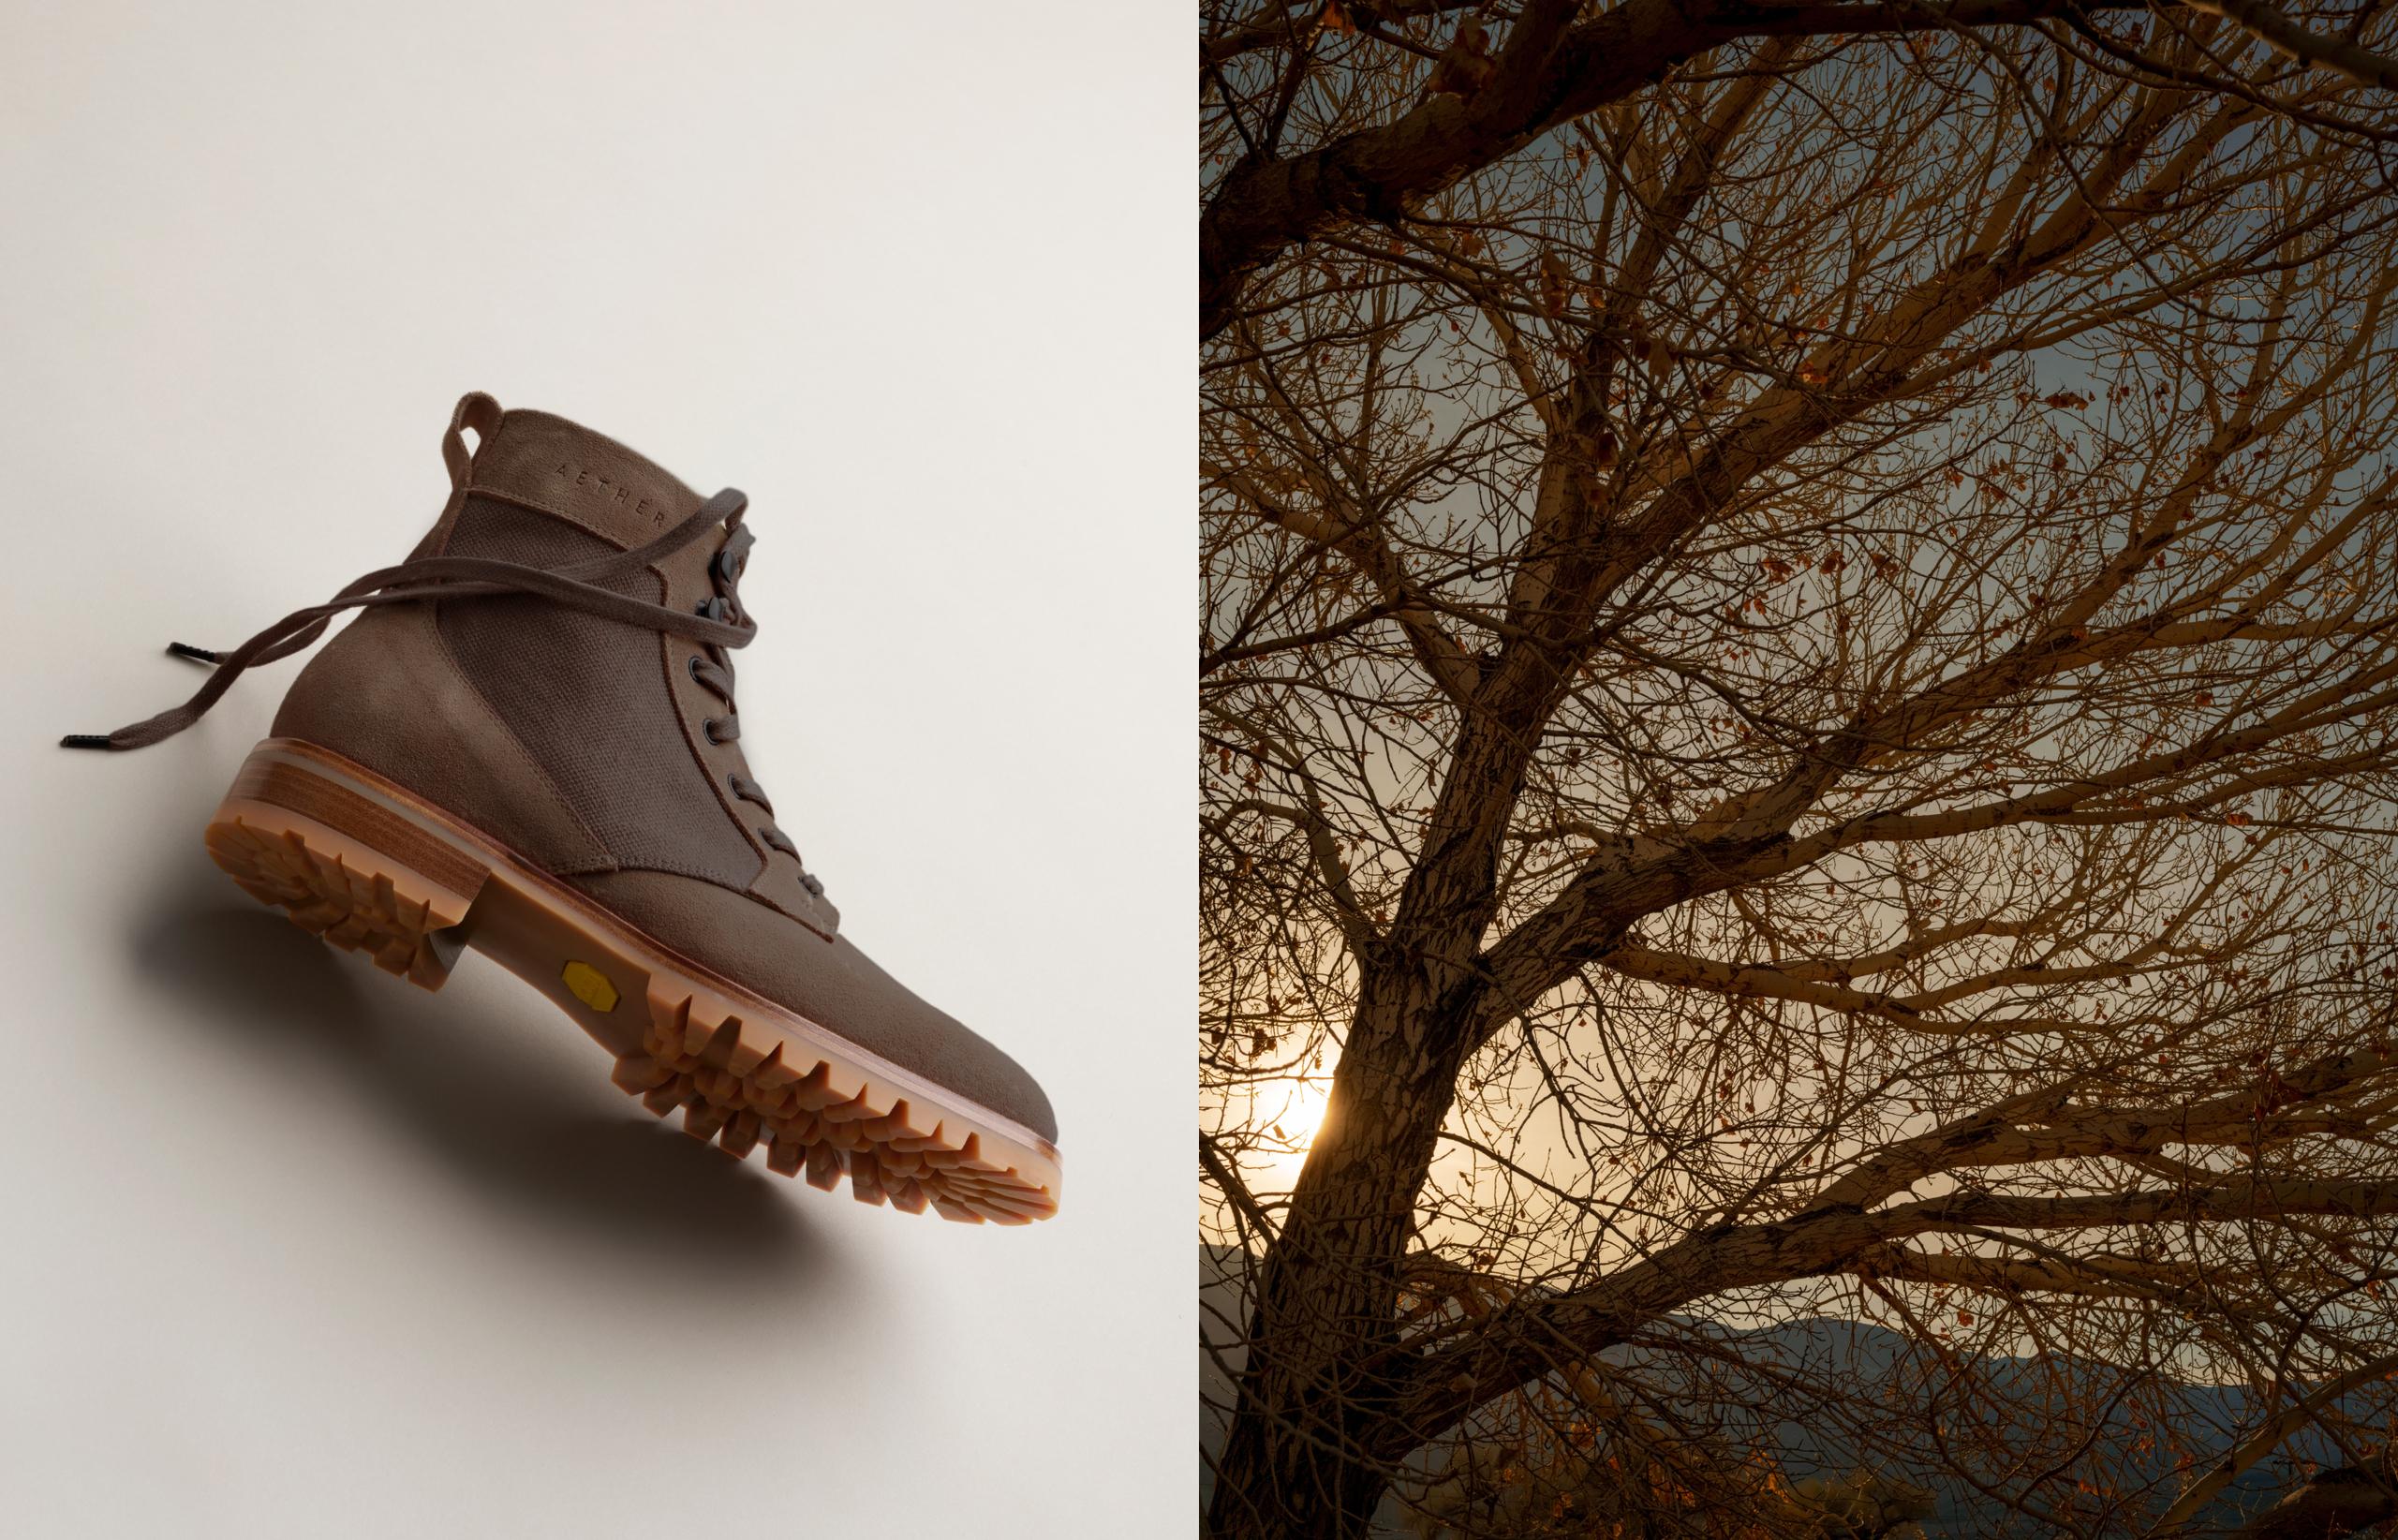 Pairing of two images, on the left a studio photo of the Ojai boot and on the right tree branches in sunset